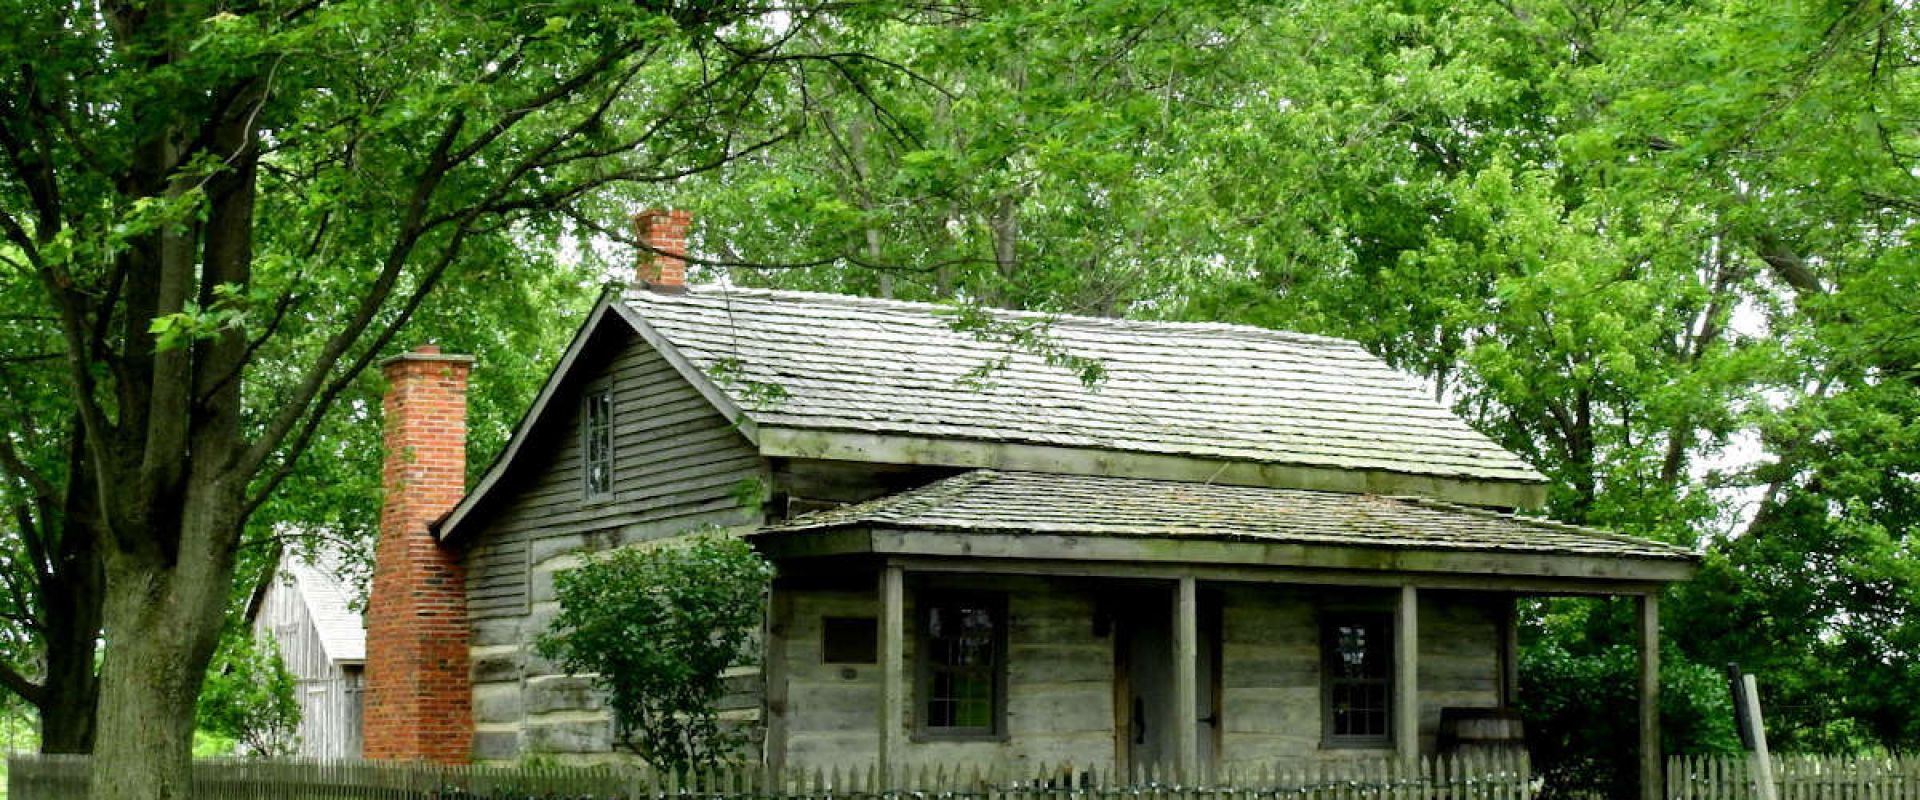 A log cabin built in 1852 that is part of the North Buxton National Historic Site & Museum. This building was part of a settlement that was a terminus on the Underground Railroad.